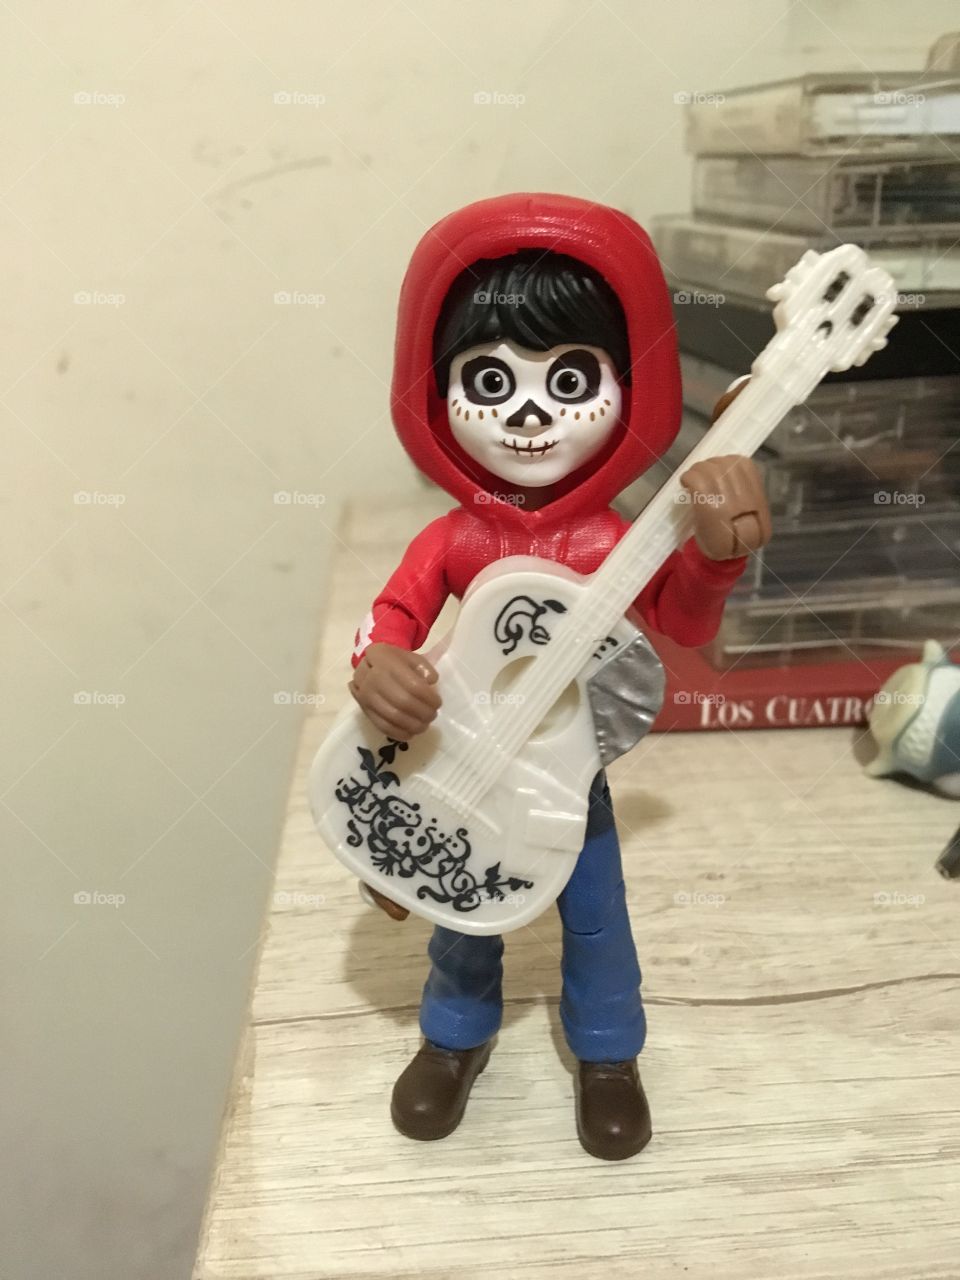 Miguel toy from Coco Pixar